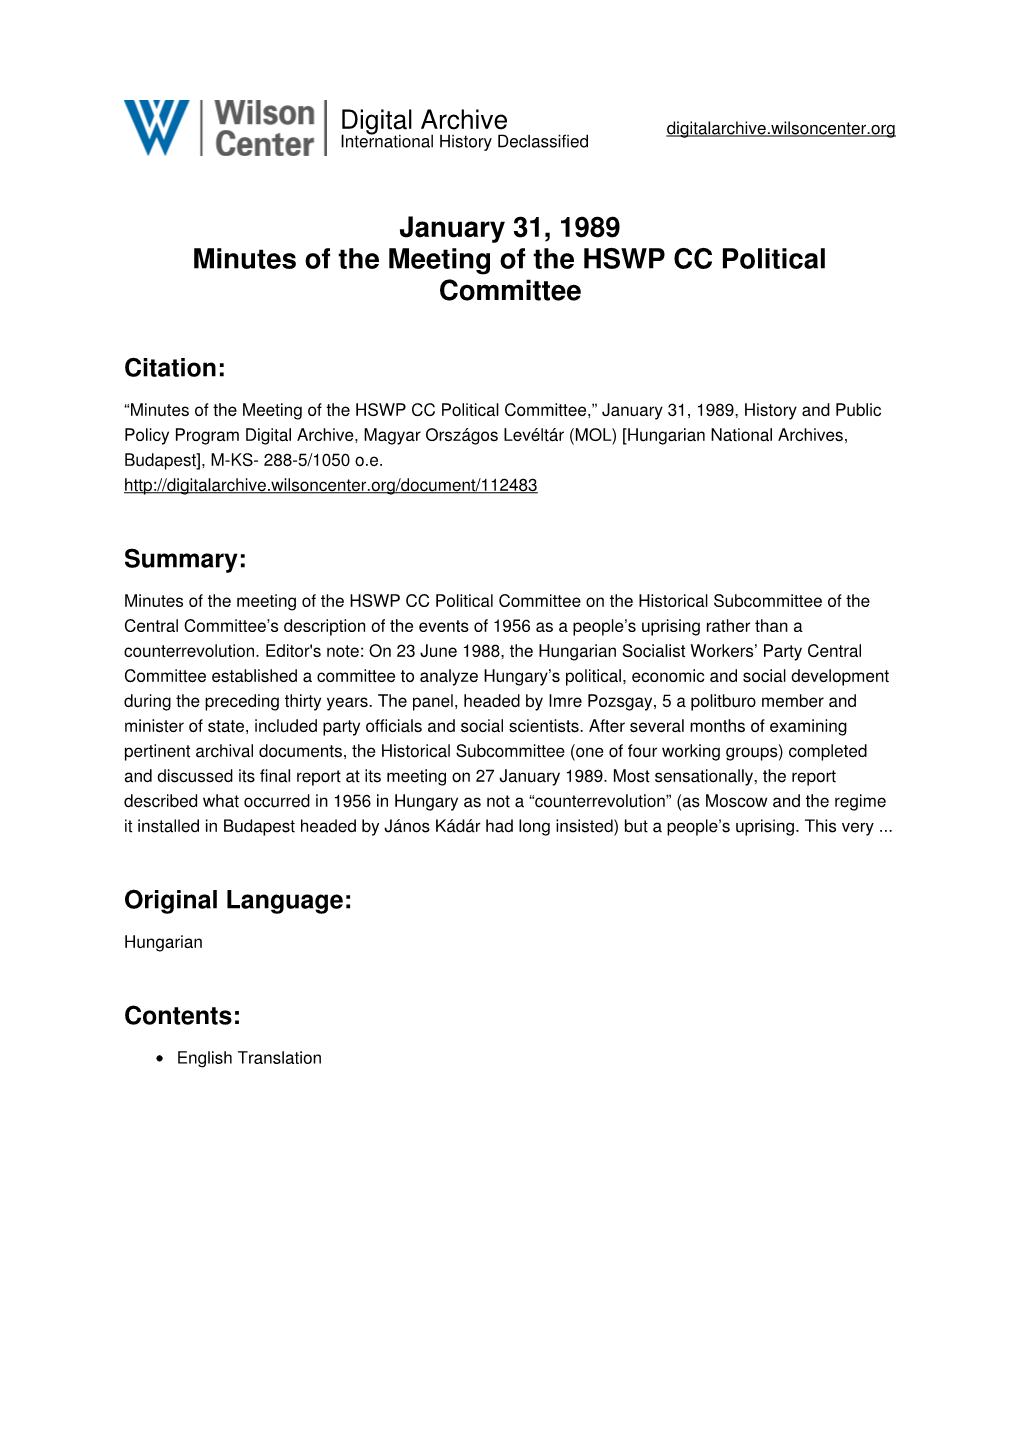 January 31, 1989 Minutes of the Meeting of the HSWP CC Political Committee